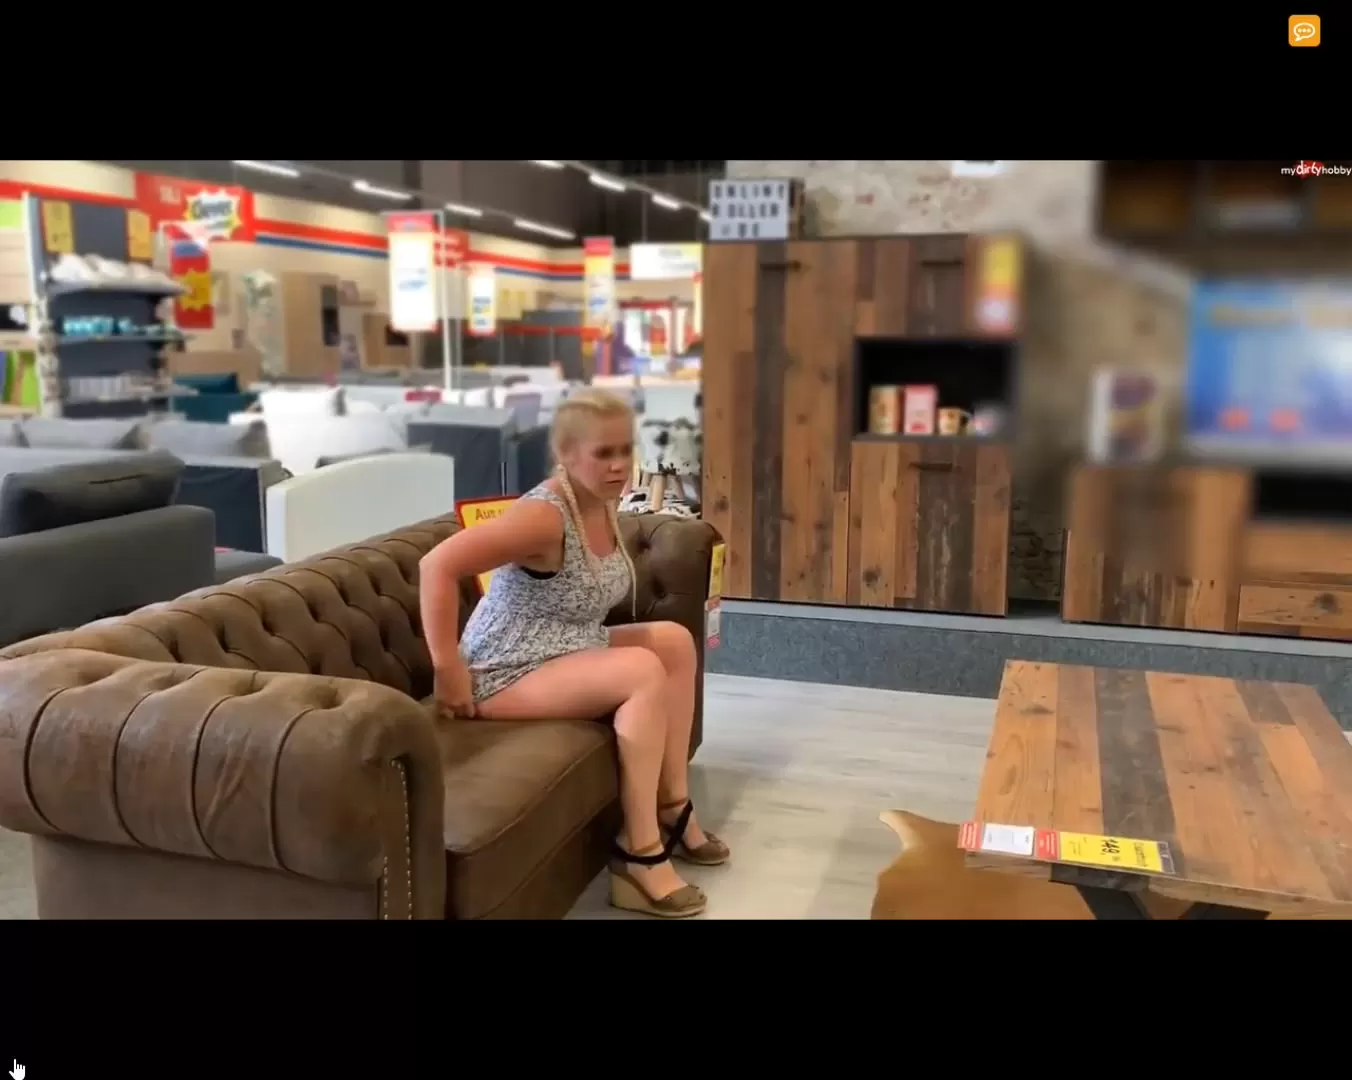 Woman pissing on a couch in furniture market picture